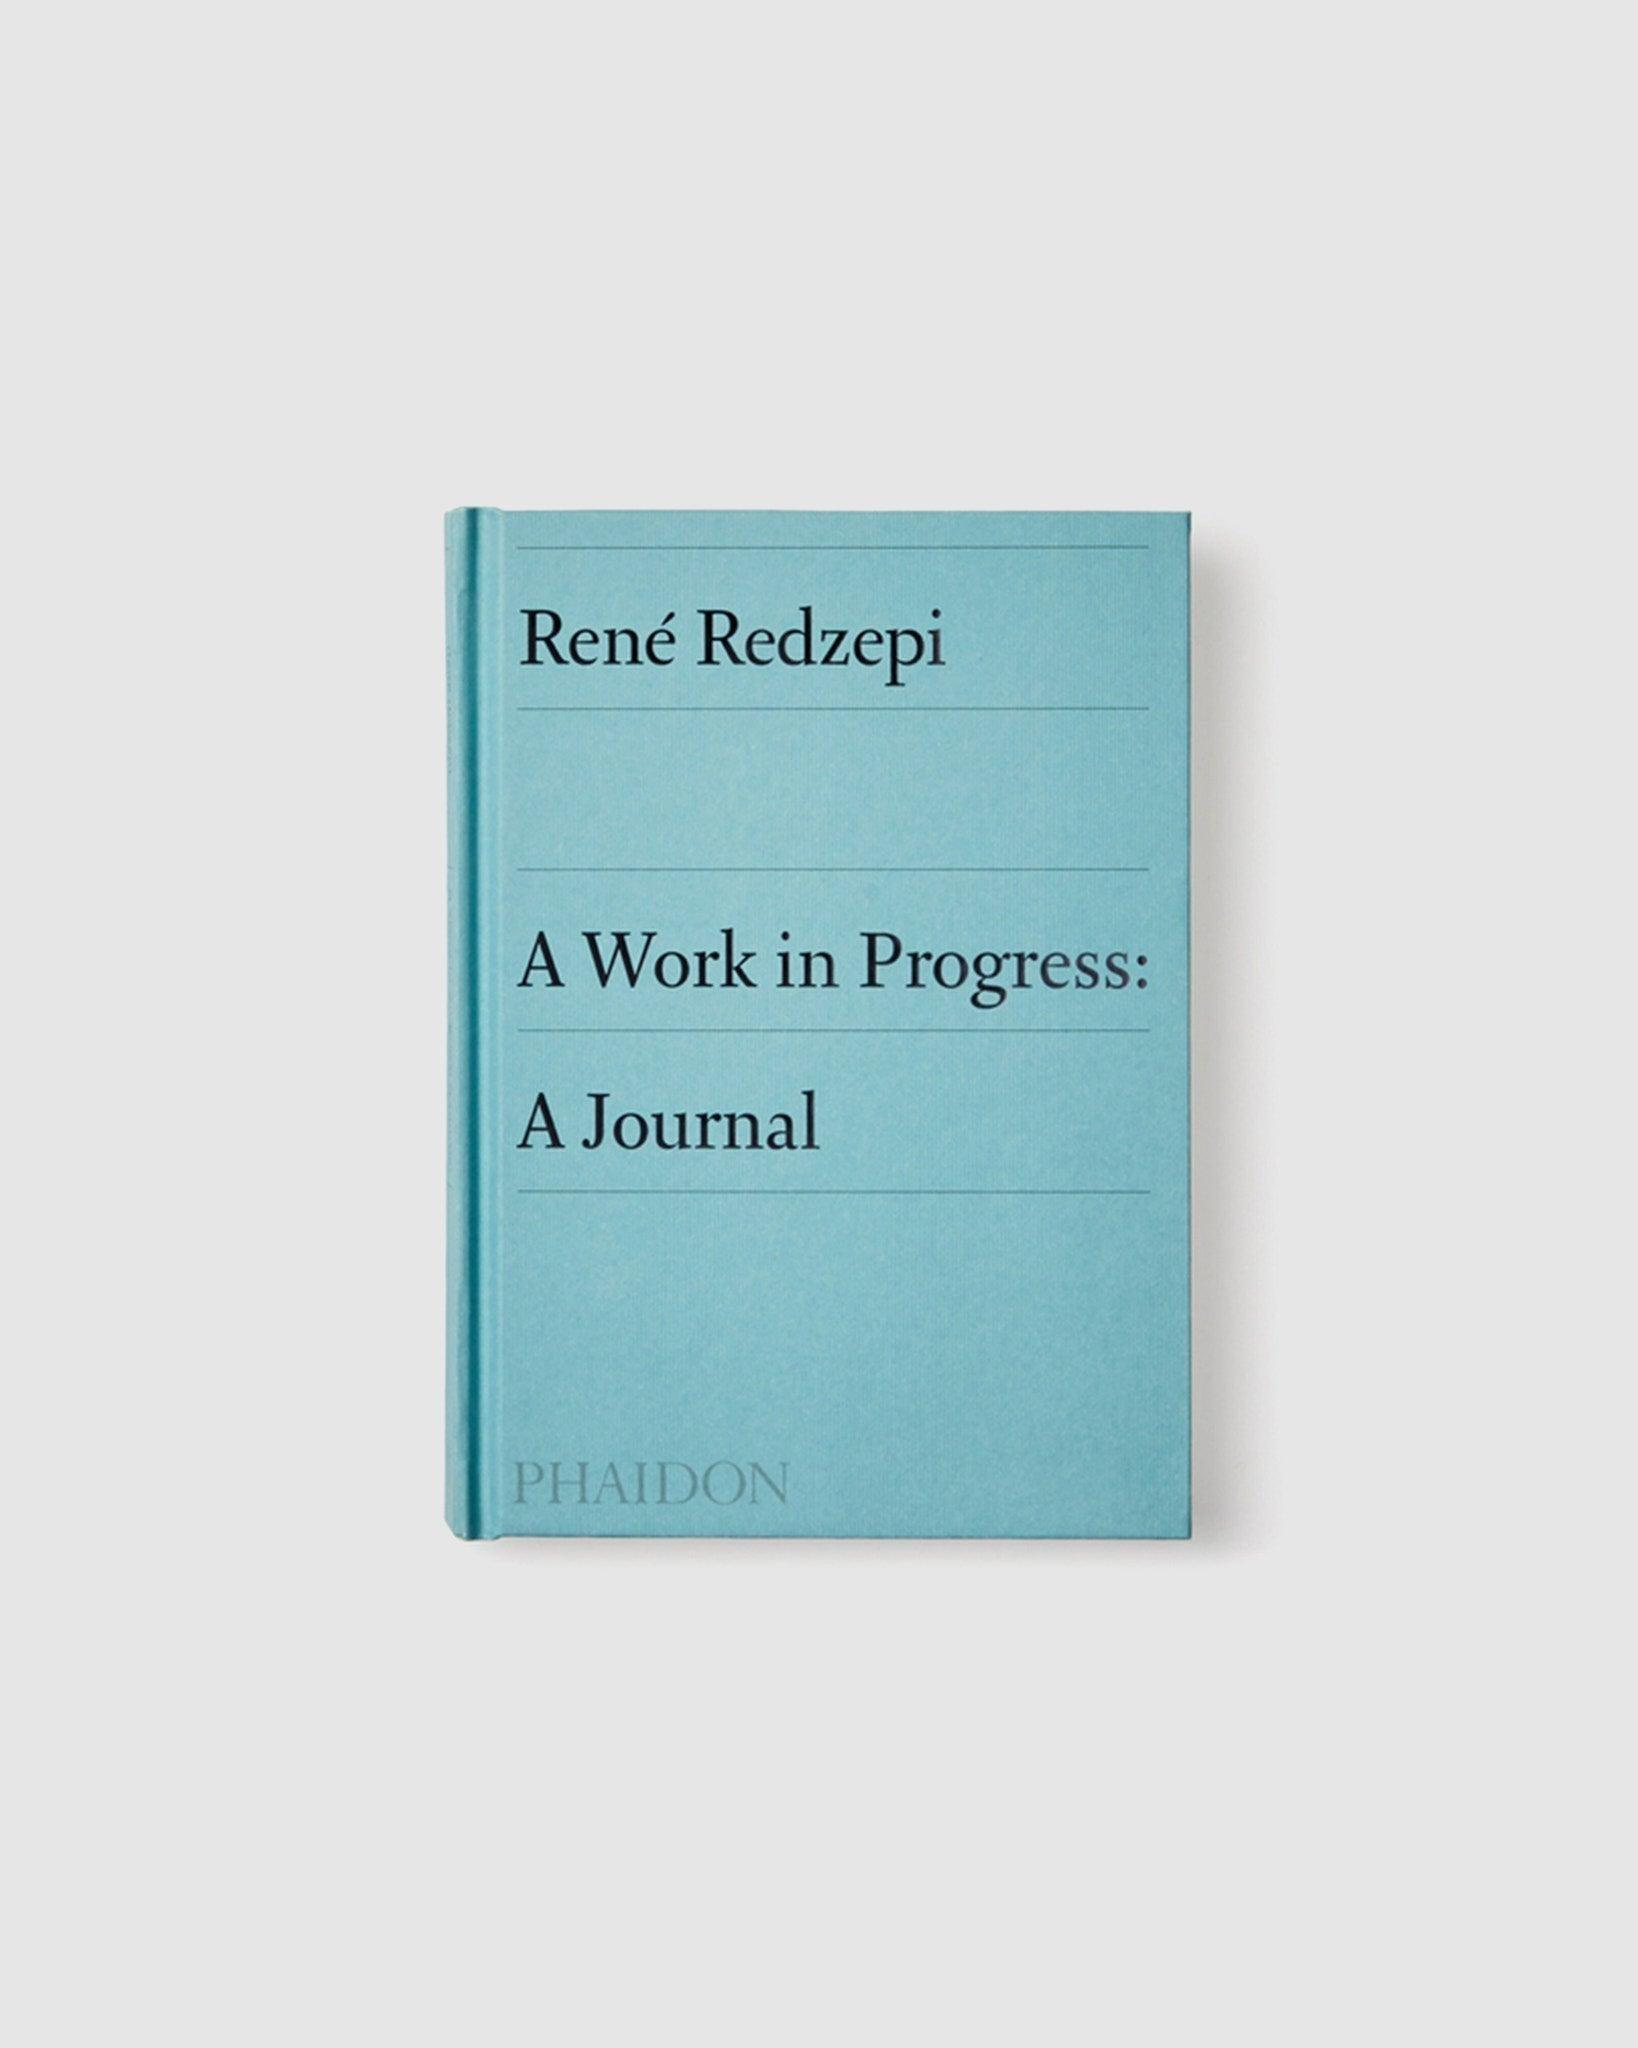 René Redzepi A Work in Progress: A Journal - {{ collection.title }} - Chinatown Country Club 